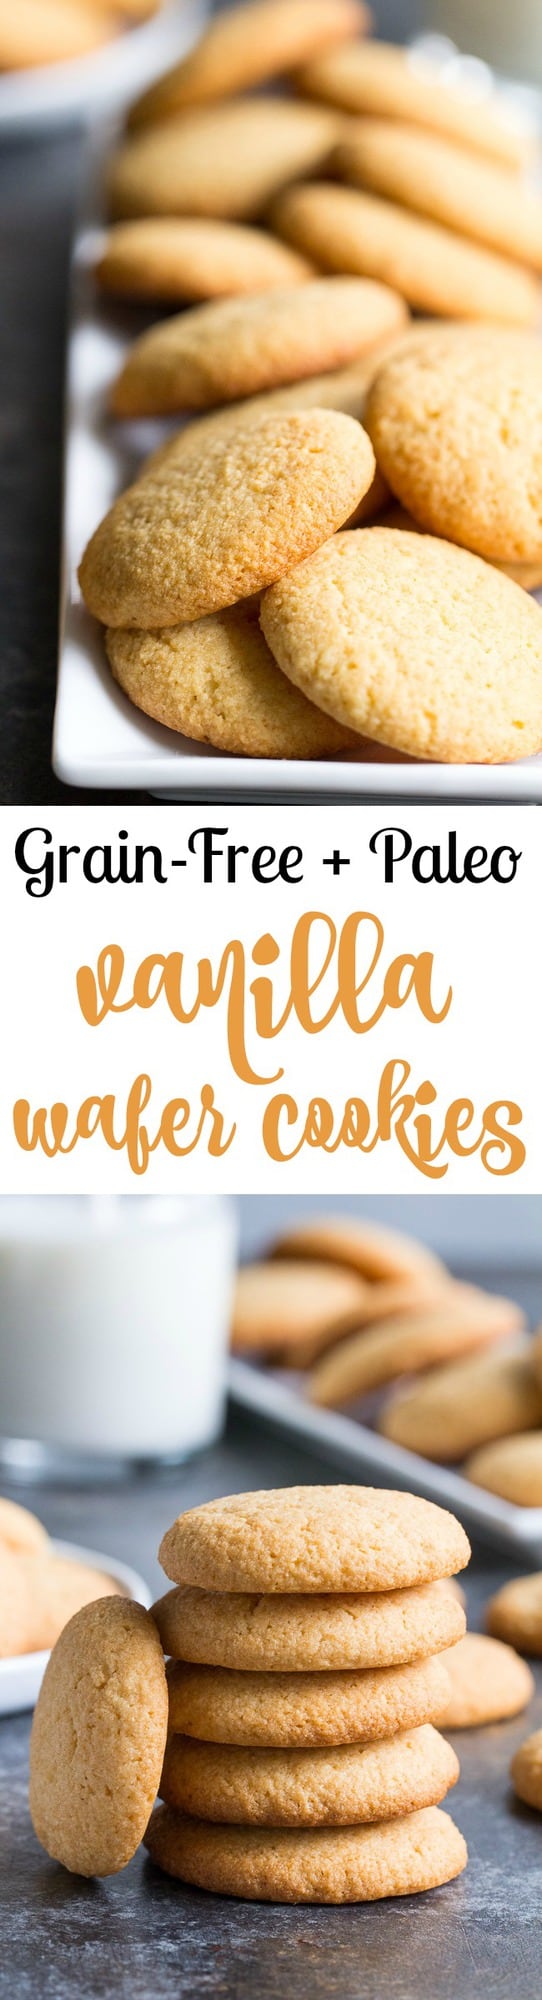 These grain free and paleo vanilla wafer cookies are light and crisp with sweet, buttery flavor. They’re perfect for healthy snacking and treats! Refined sugar free, kid approved. #AD @Wholesomesweet